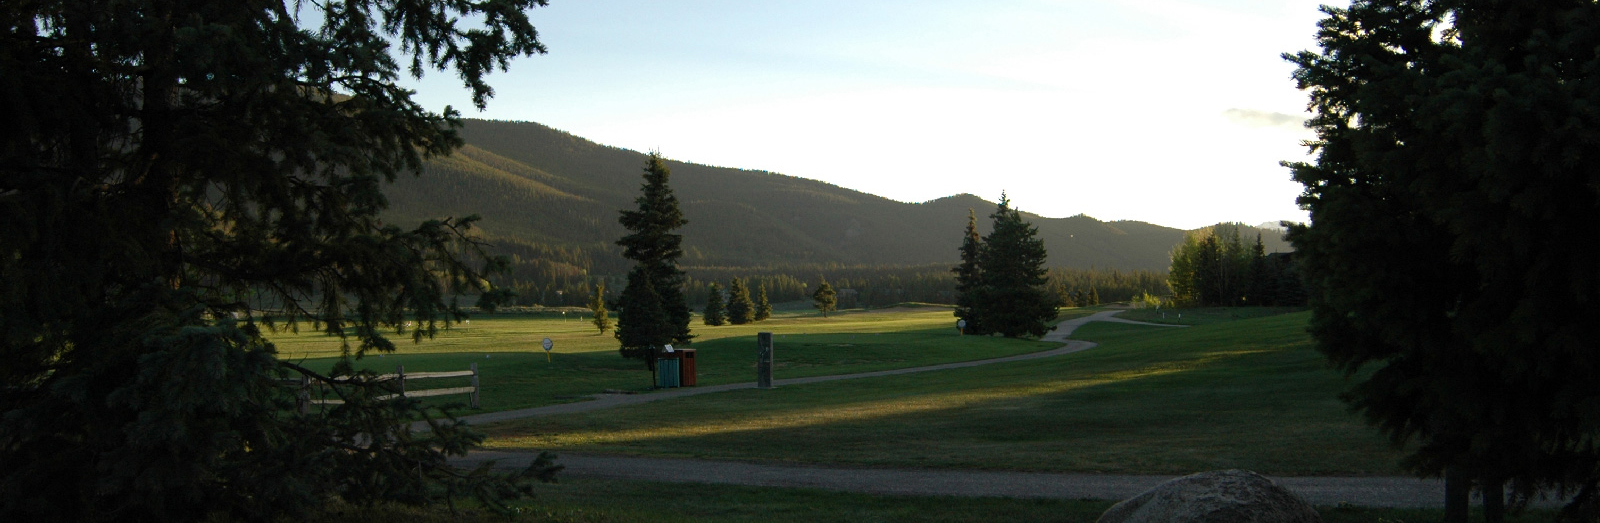 Golfing in Summit County - Keystone pictured